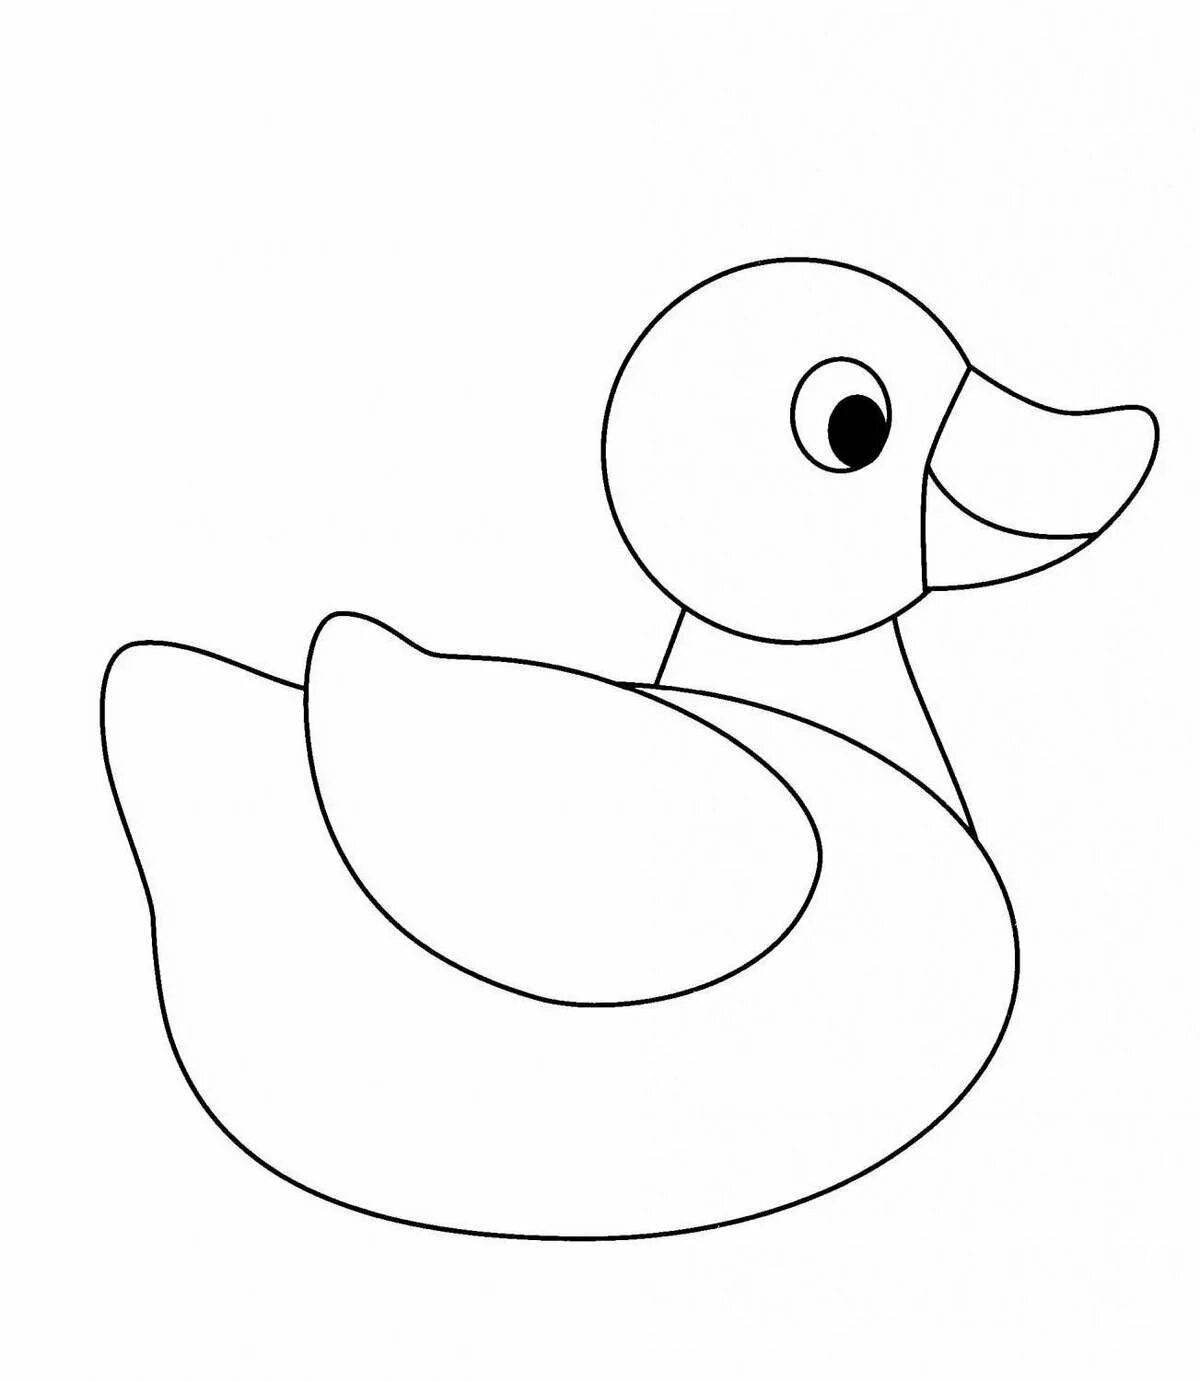 Impressive Dymkovo duck, second youngest coloring page